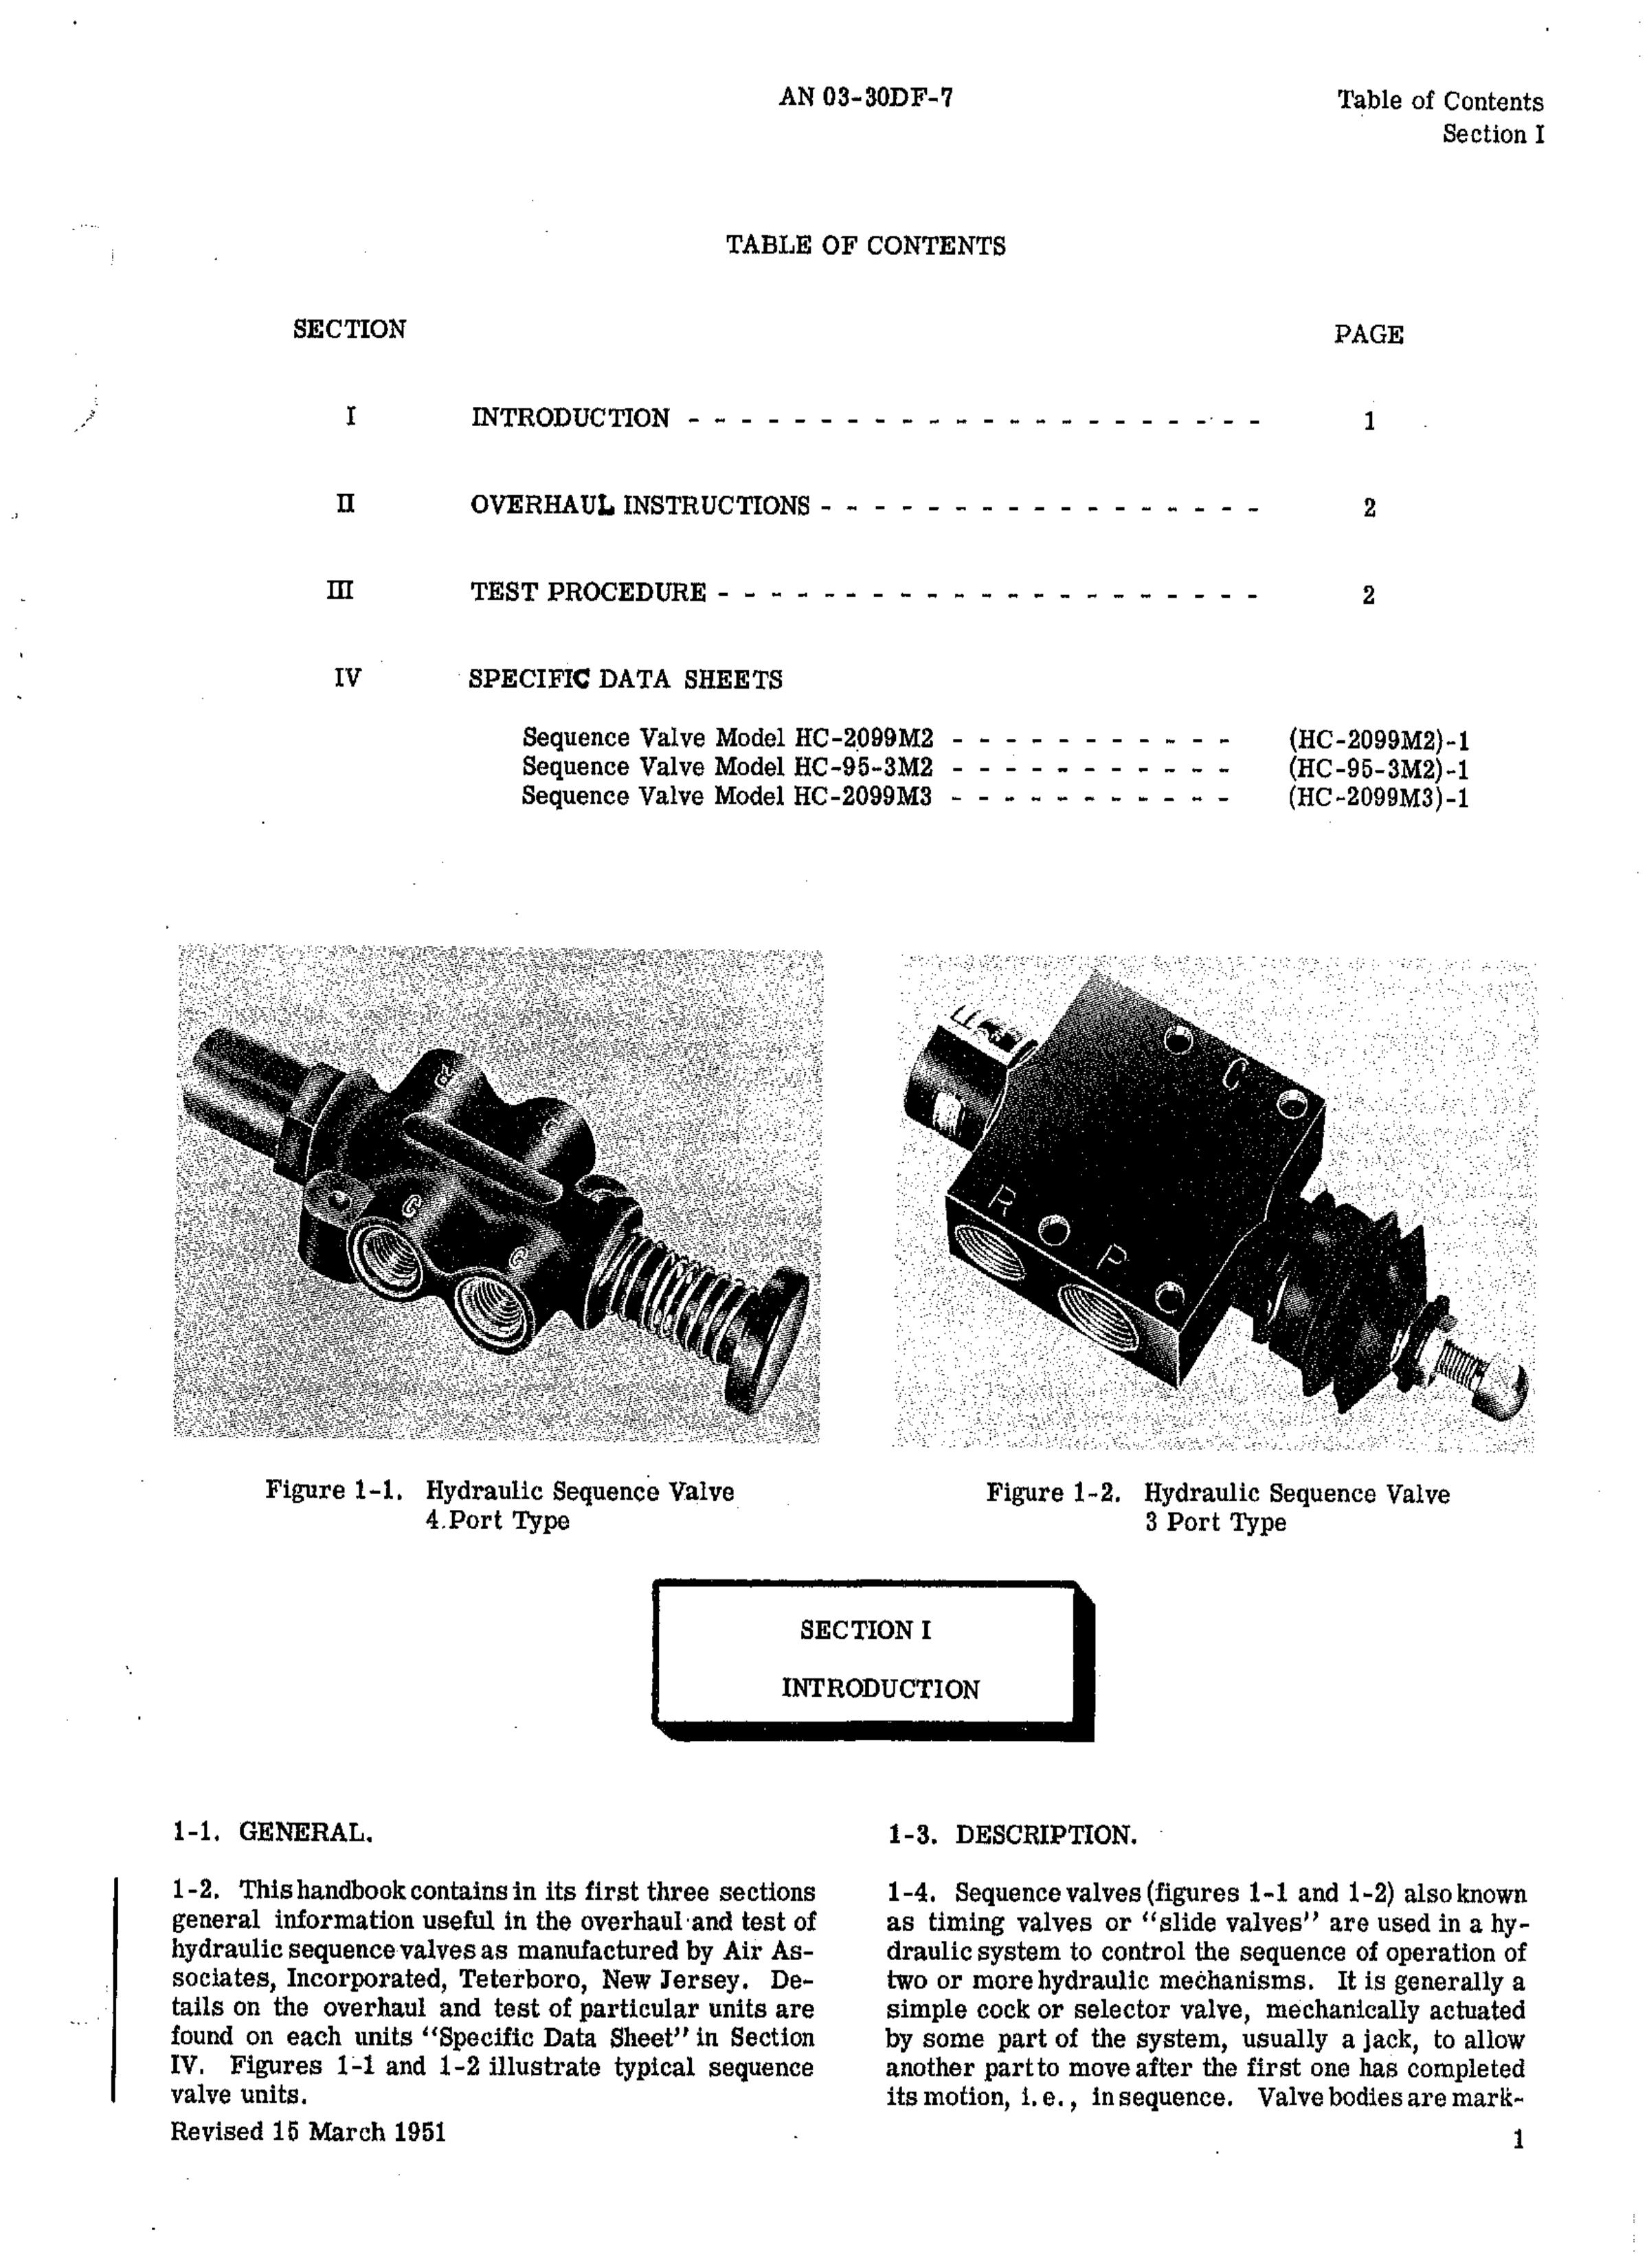 Sample page 3 from AirCorps Library document: Overhaul Instructions for Hydraulic Sequence Valves